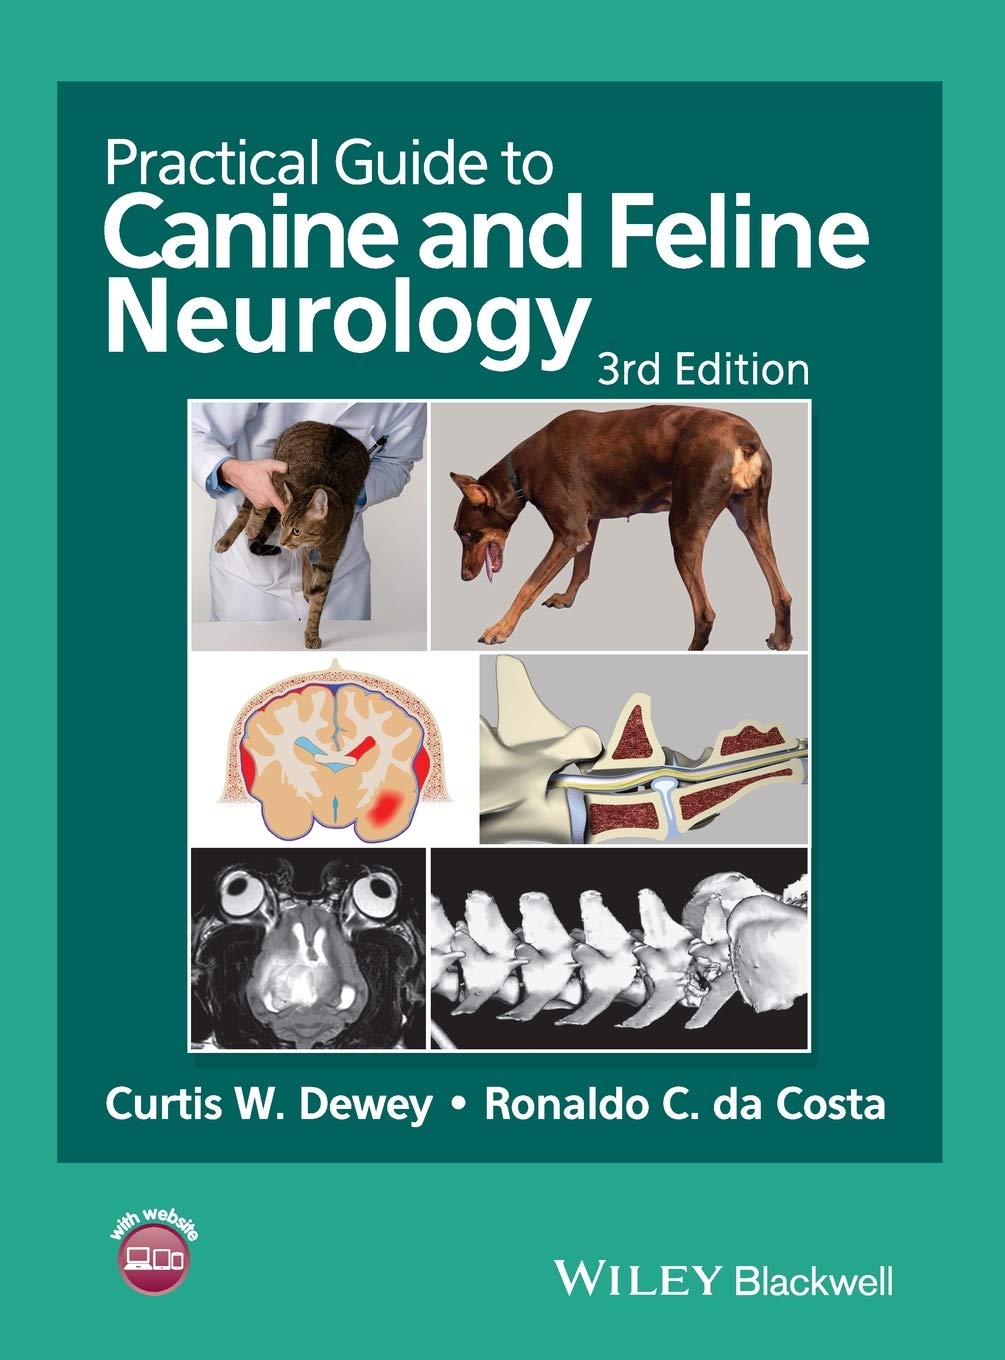 Practical Guide to Canine and Feline Neurology.